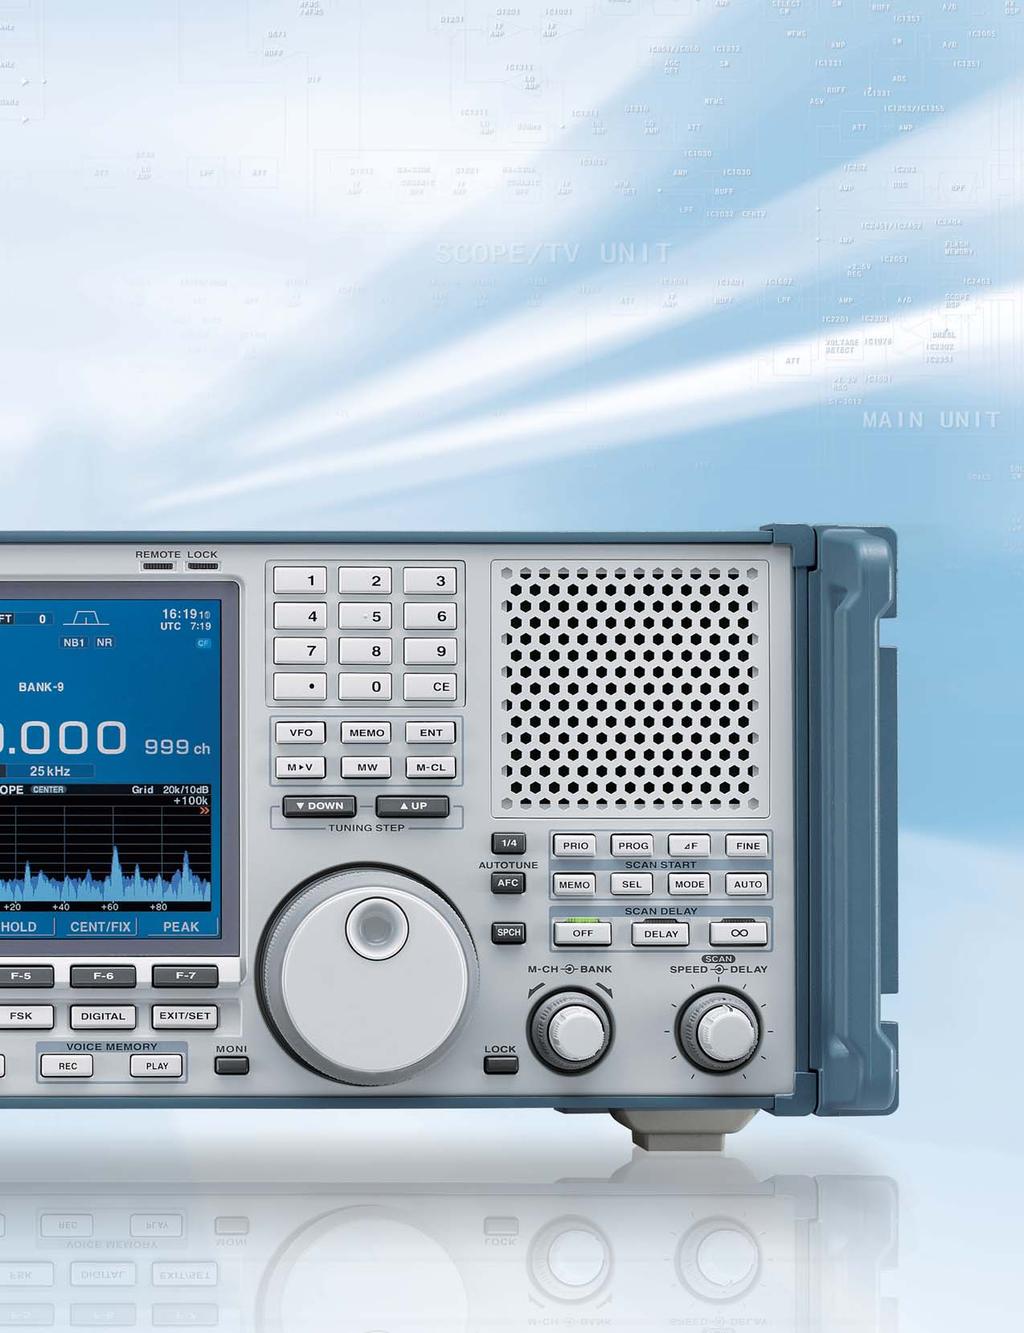 The IC-R95 is a high-end professional communications receiver for wideband monitoring, signal detection, spectrum analysis, recording received signals, and more. Main features.